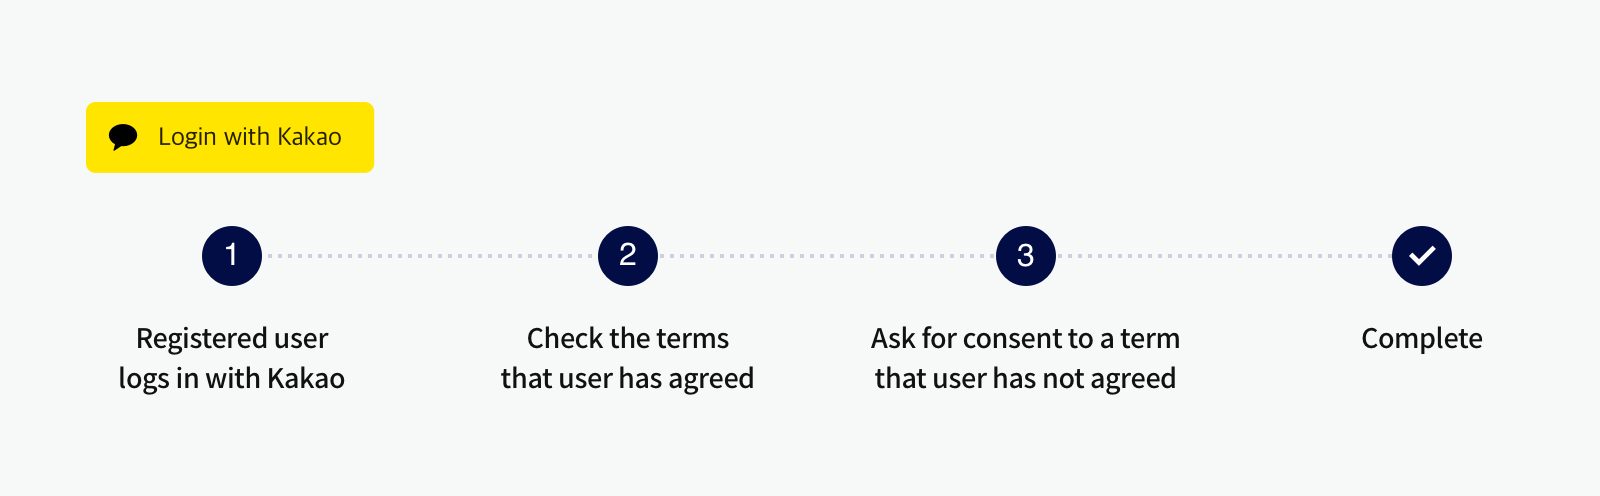 Process of obtaining consent to the terms that have not been agreed